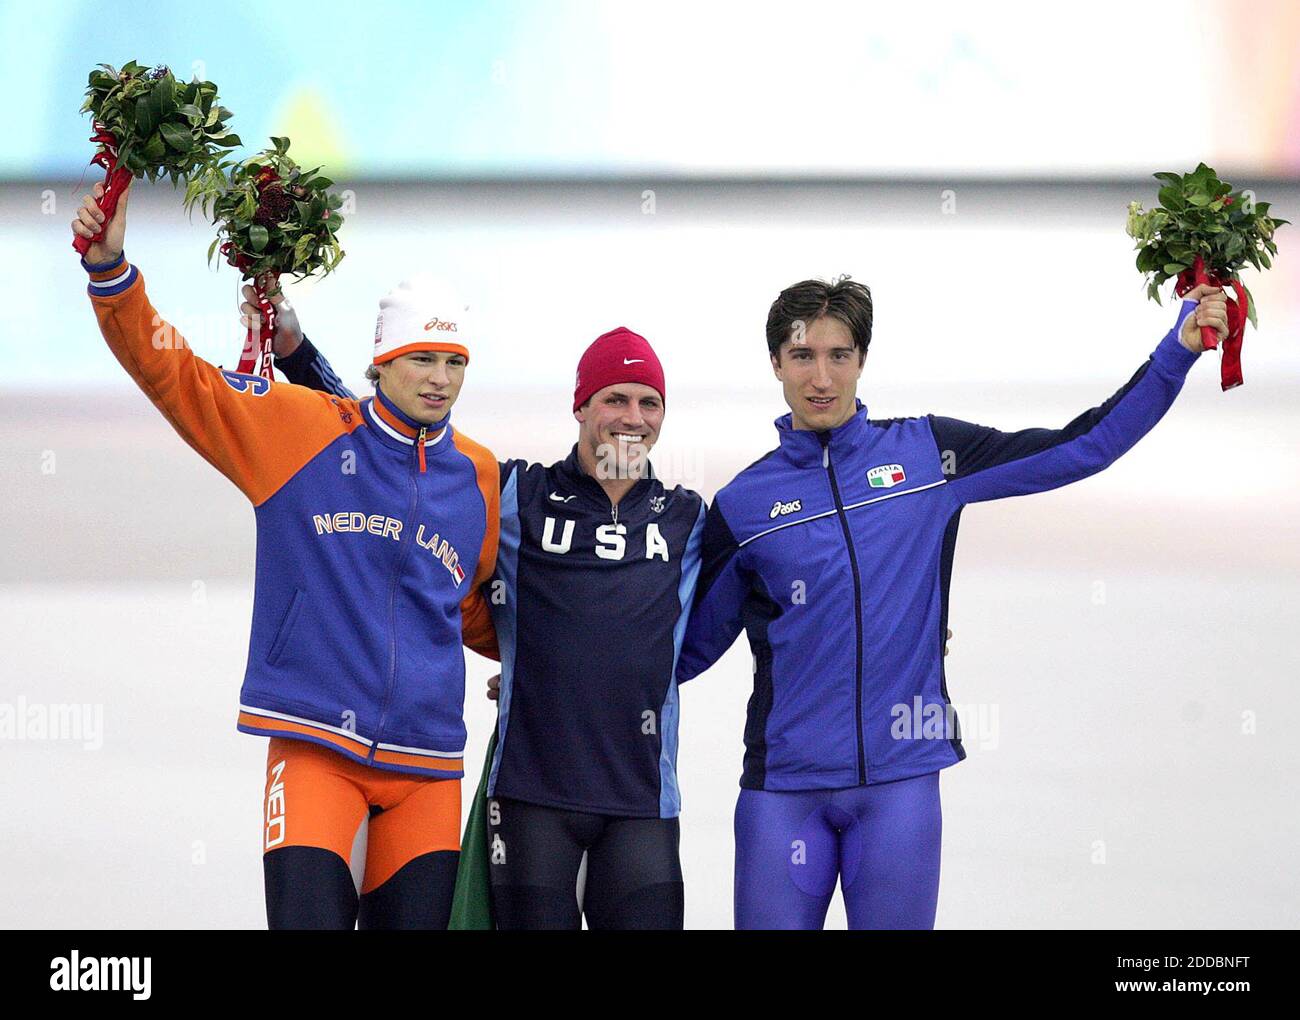 NO FILM, NO VIDEO, NO TV, NO DOCUMENTARY - Silver medalist Sven Kramer, of the Netherlands, gold medalist Chad Hedrick, of the USA and bronze medalist Enrico Fabris, of Italy, stand on the podium following the men's 5000m speed skating event at the Oval Lingotto venue on Saturday, February 11, 2006, during the 2006 Winter games in Turin, Italy. Photo by Ron Jenkins/Fort Worth Star-Telegram/KRT/Cameleon/ABACAPRESS.COM Stock Photo